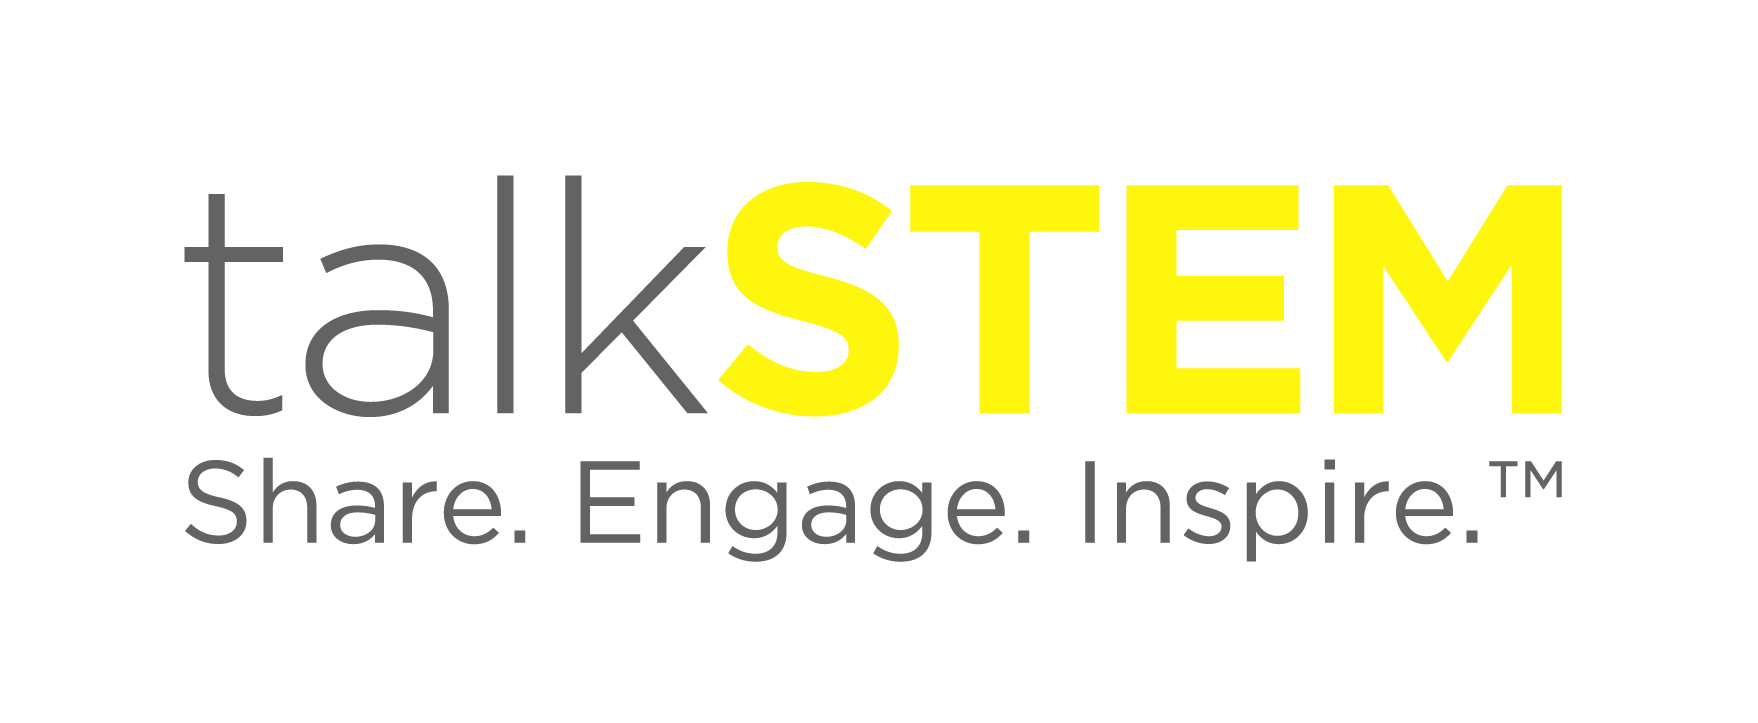 talkSTEM is a unique 501(c)3 non-profit organization whose mission is the development of future generations of female and underrepresented STEM leaders.